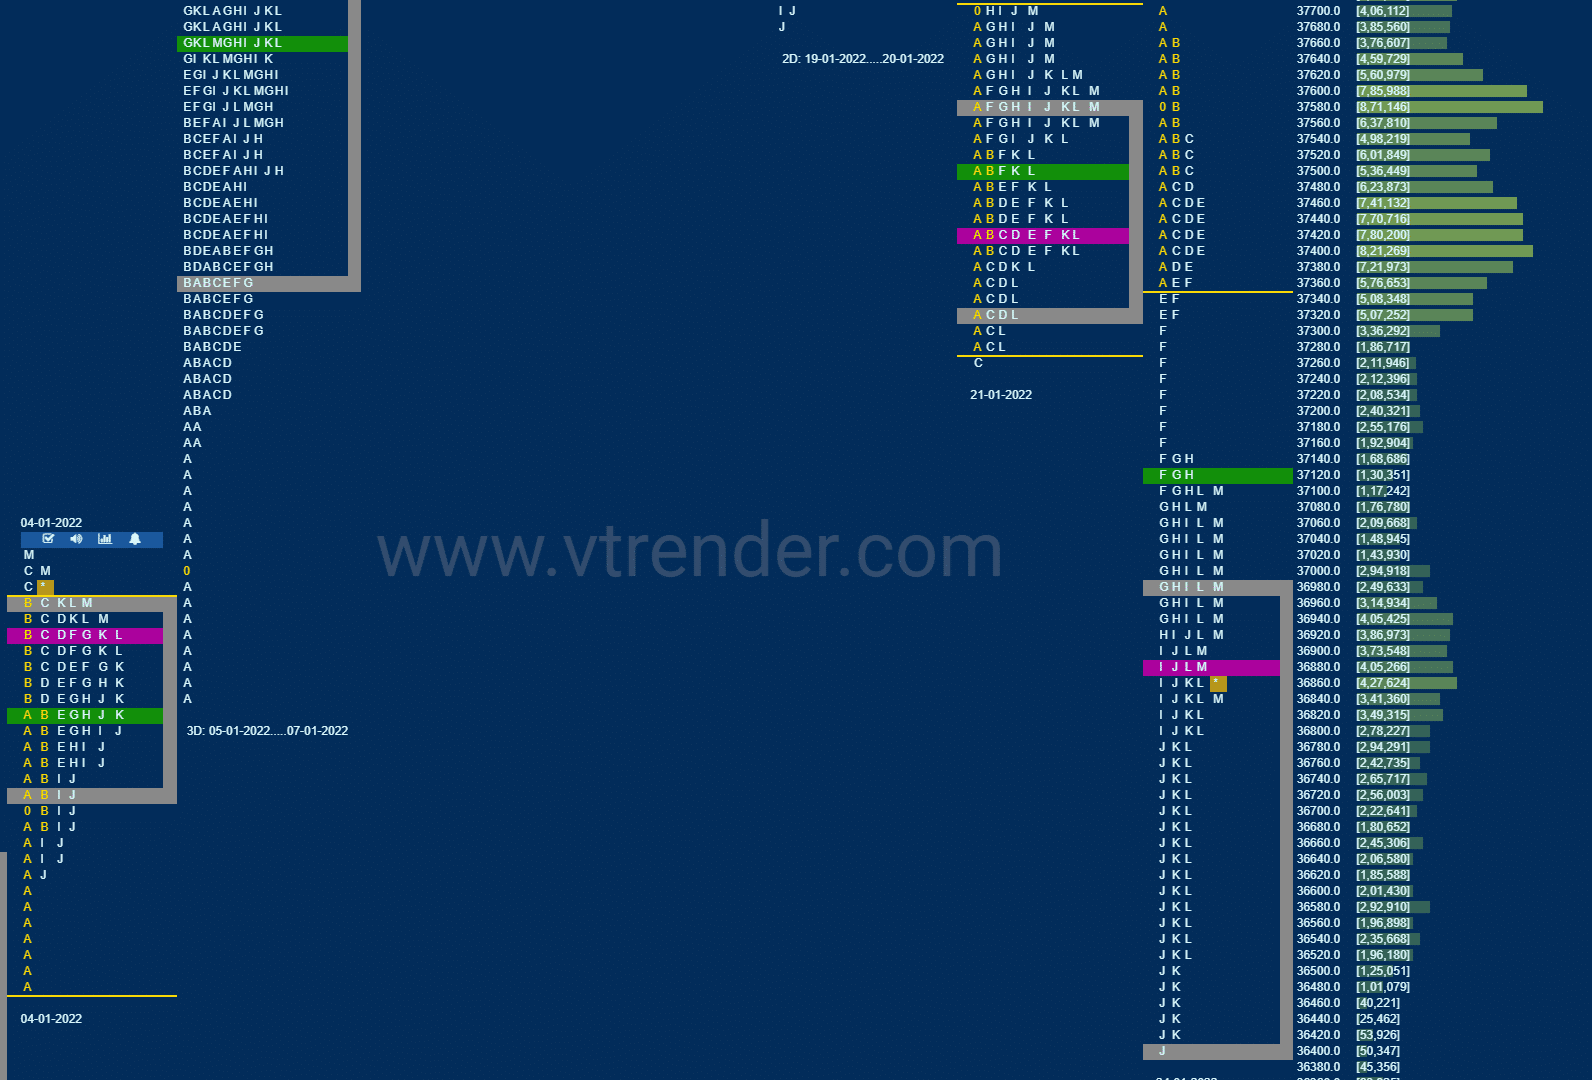 Bnf 16 Market Profile Analysis Dated 24Th January 2022 Banknifty Futures, Charts, Day Trading, Intraday Trading, Intraday Trading Strategies, Market Profile, Market Profile Trading Strategies, Nifty Futures, Order Flow Analysis, Support And Resistance, Technical Analysis, Trading Strategies, Volume Profile Trading